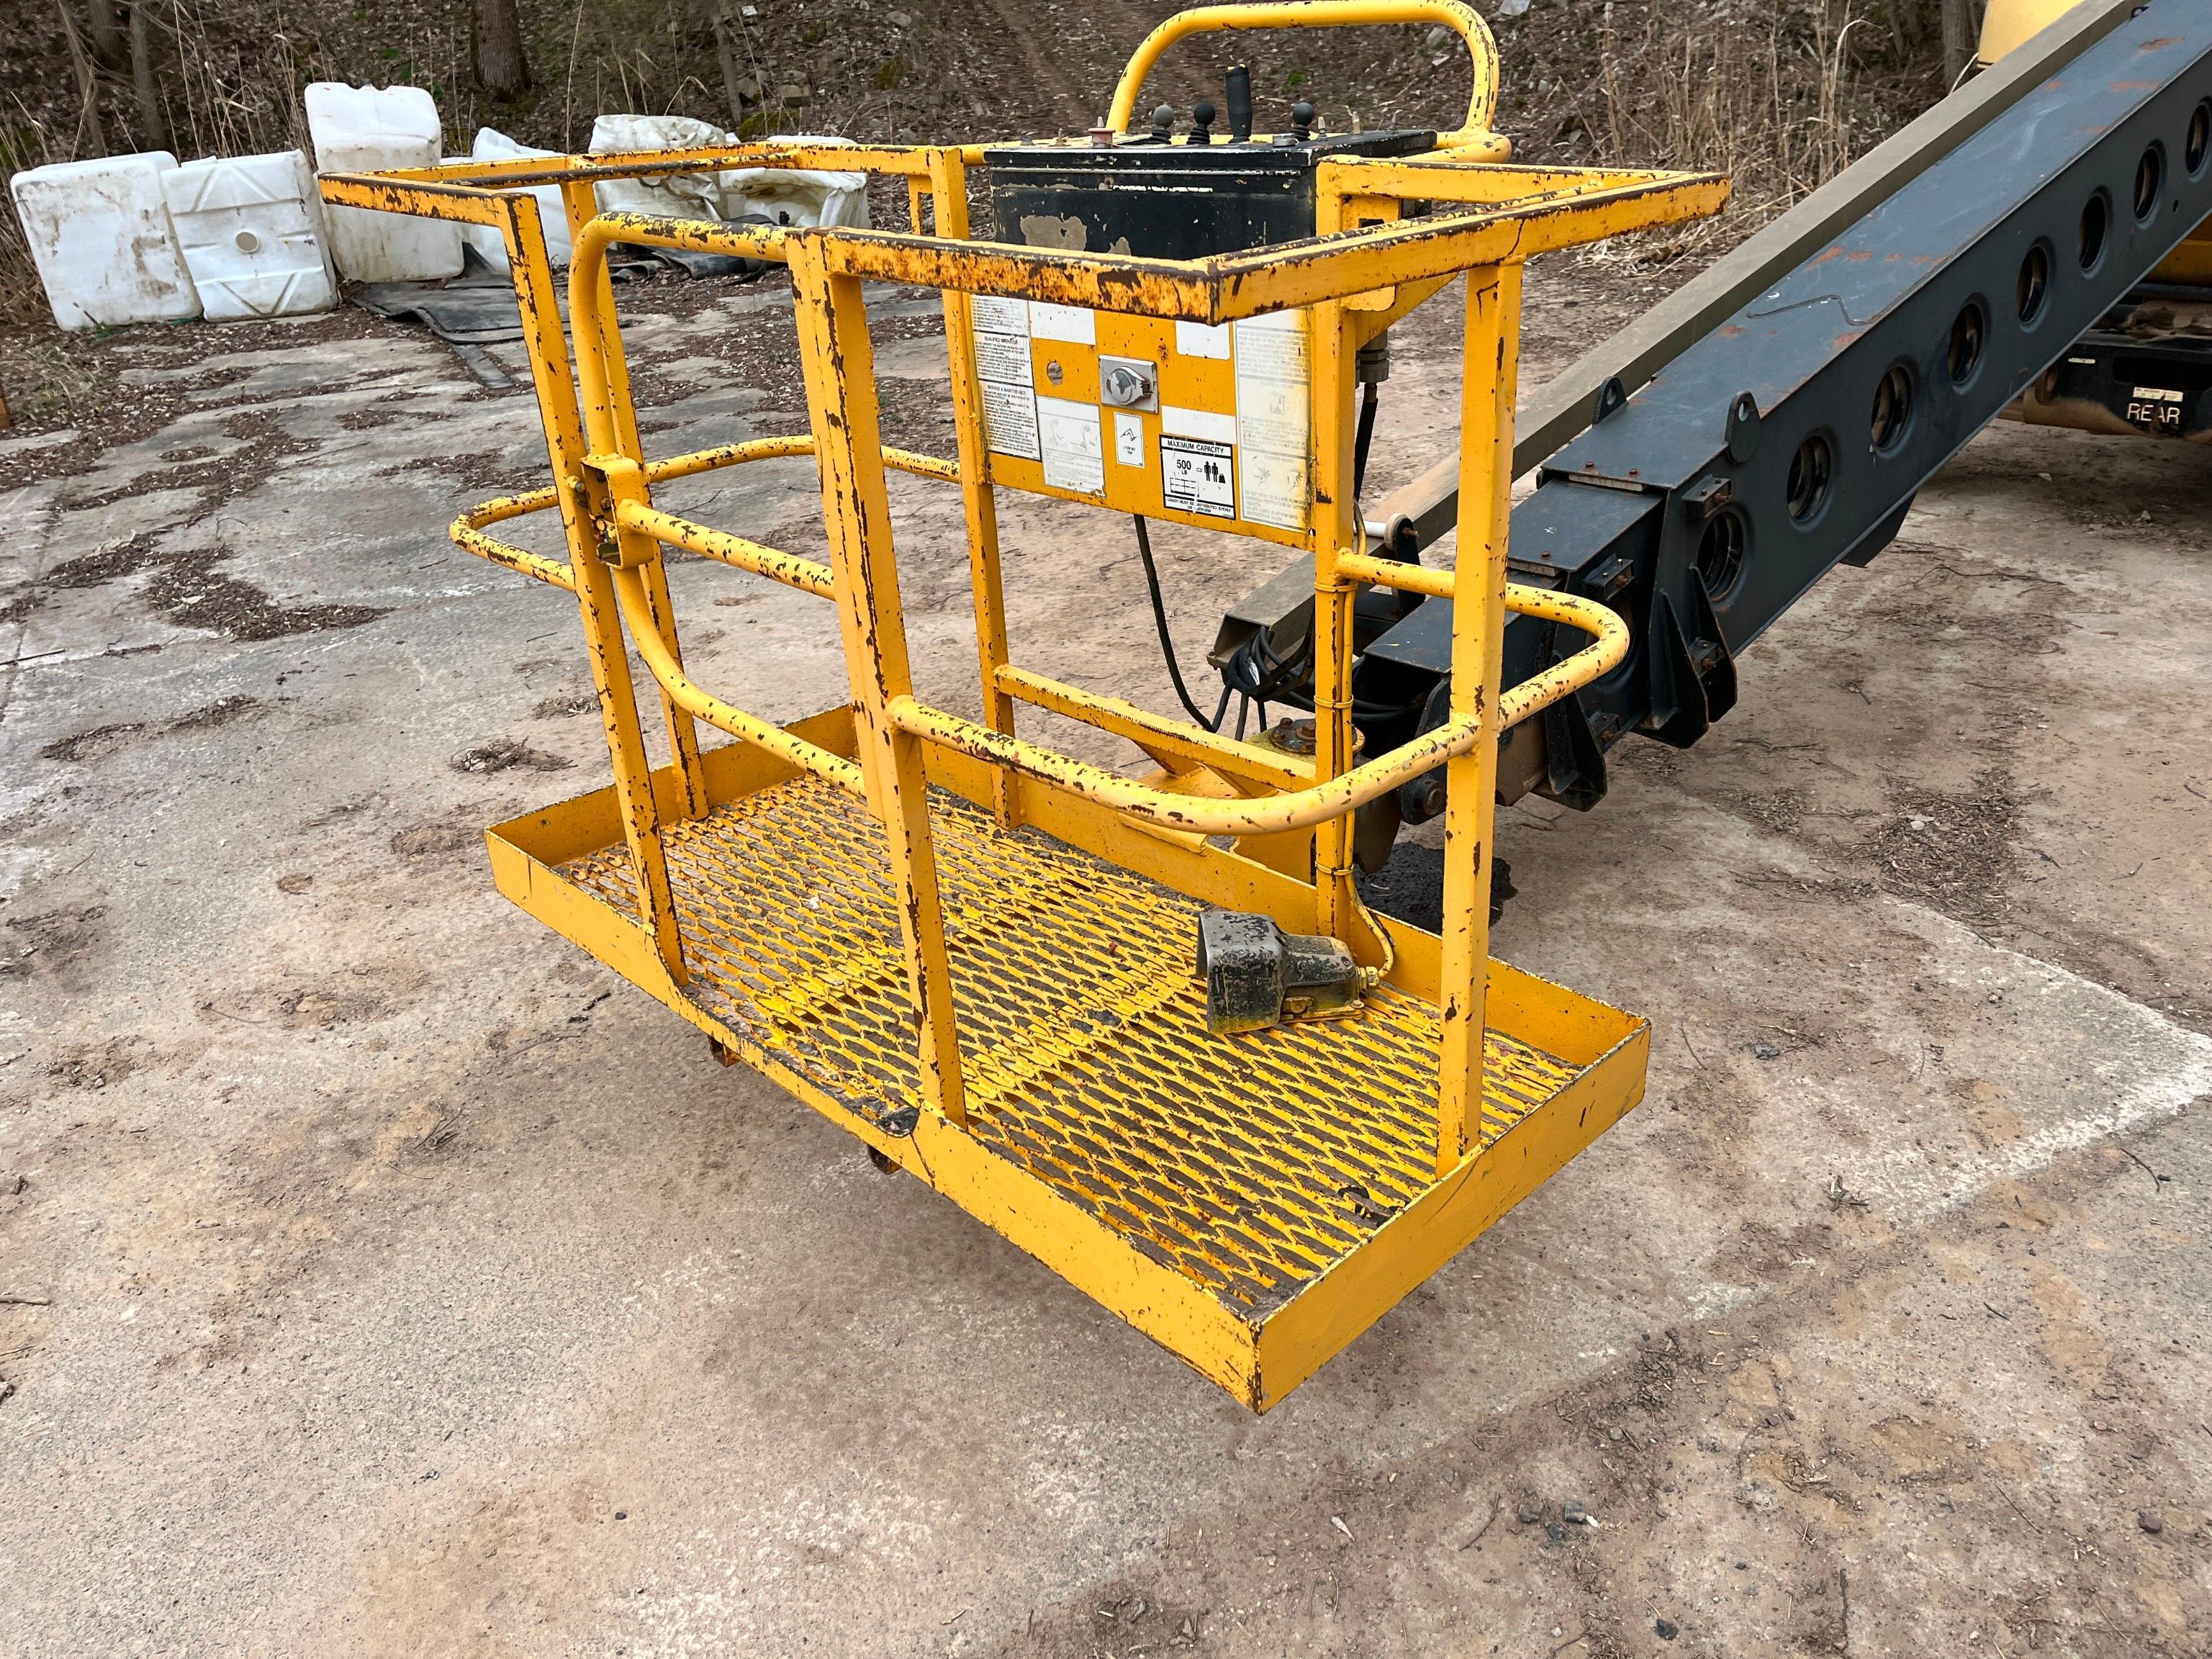 GROVE MZ66DXT BOOM LIFT SN:253158 4x4, powered by 4 cylinder dual fuel engine, equipped with 66ft.